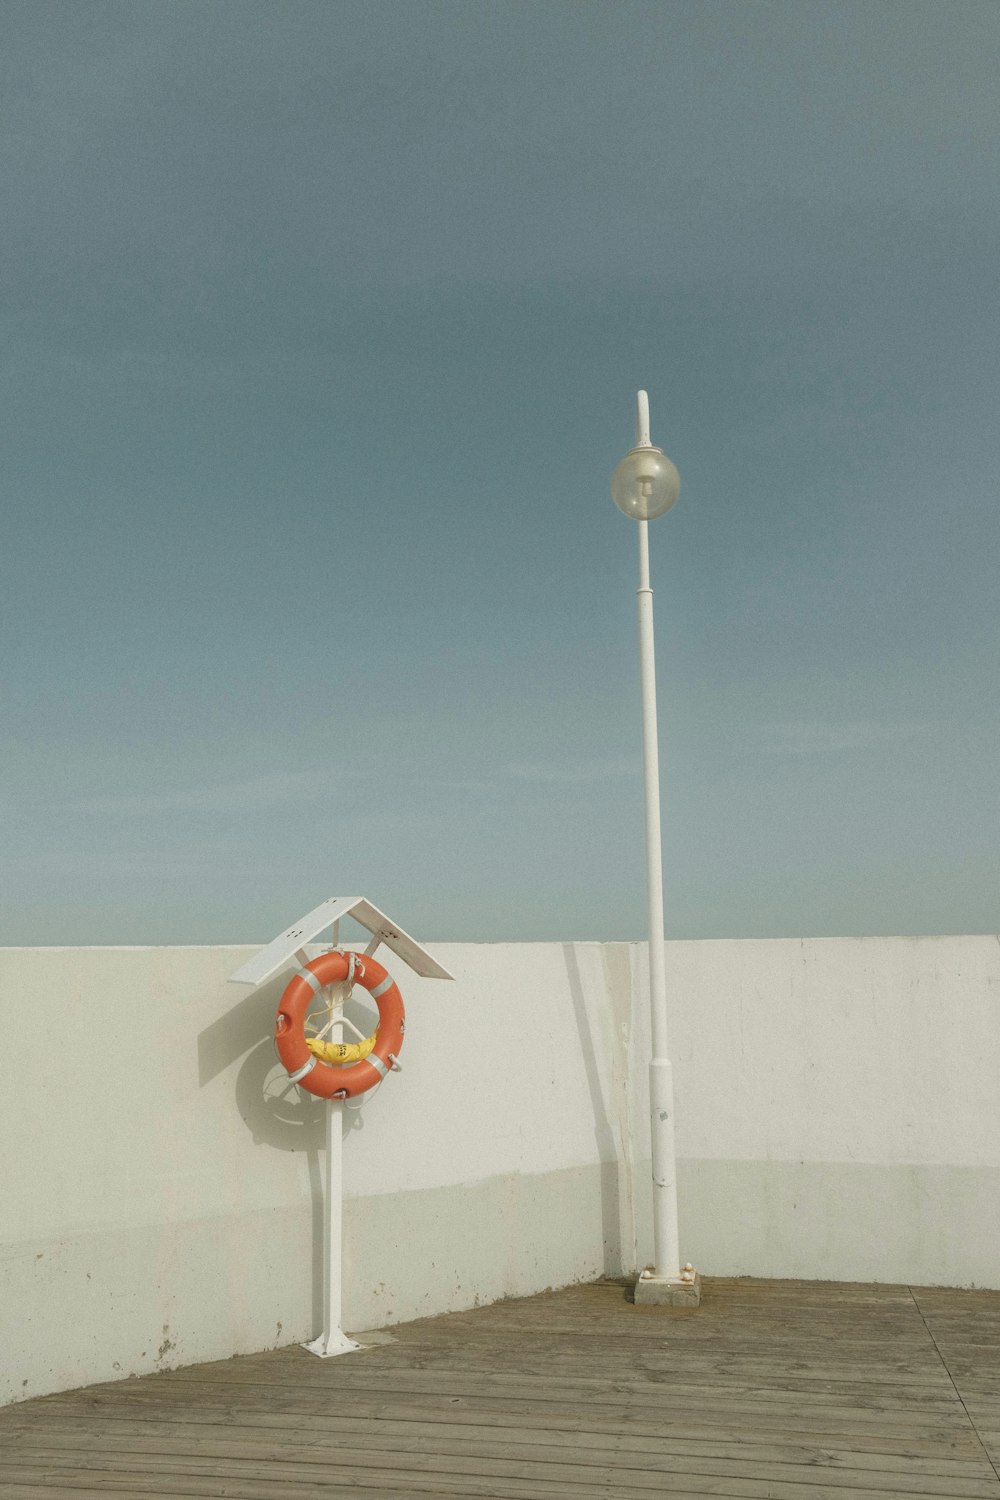 a life preserver on the side of a building